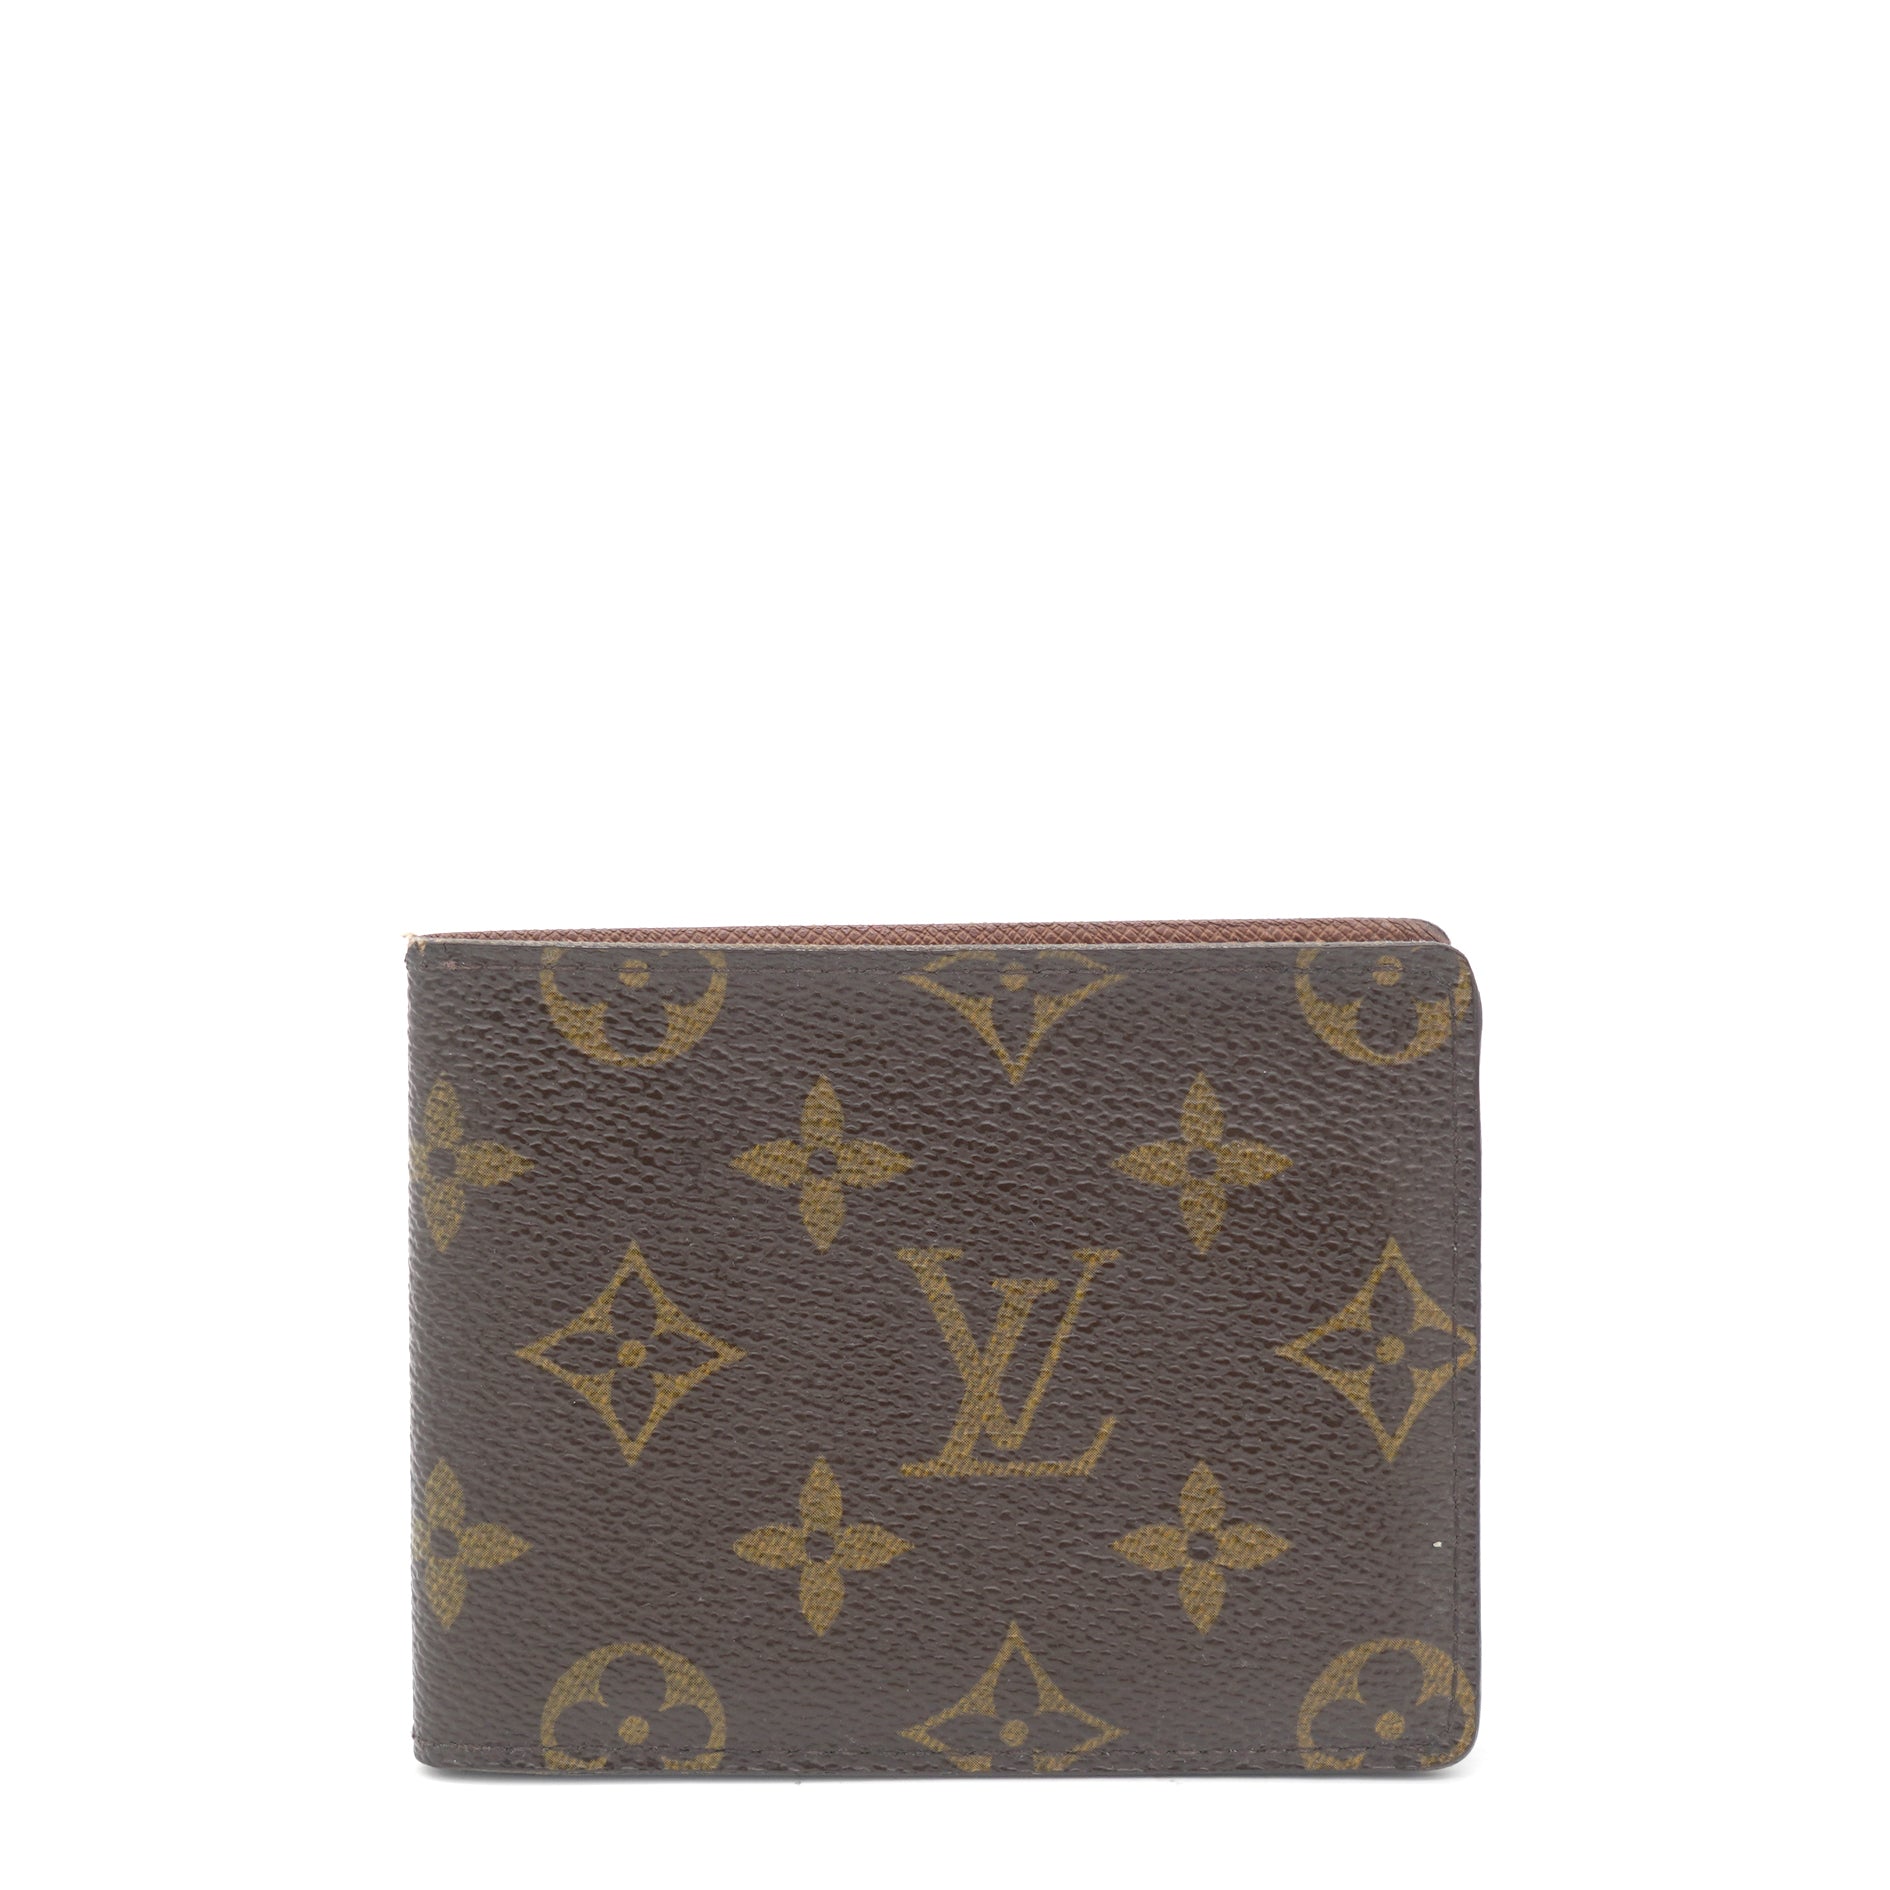 LOUIS VUITTON LV Ray Bum Bag Pouch Monogram Glace Leather Brown M46550  64AC928